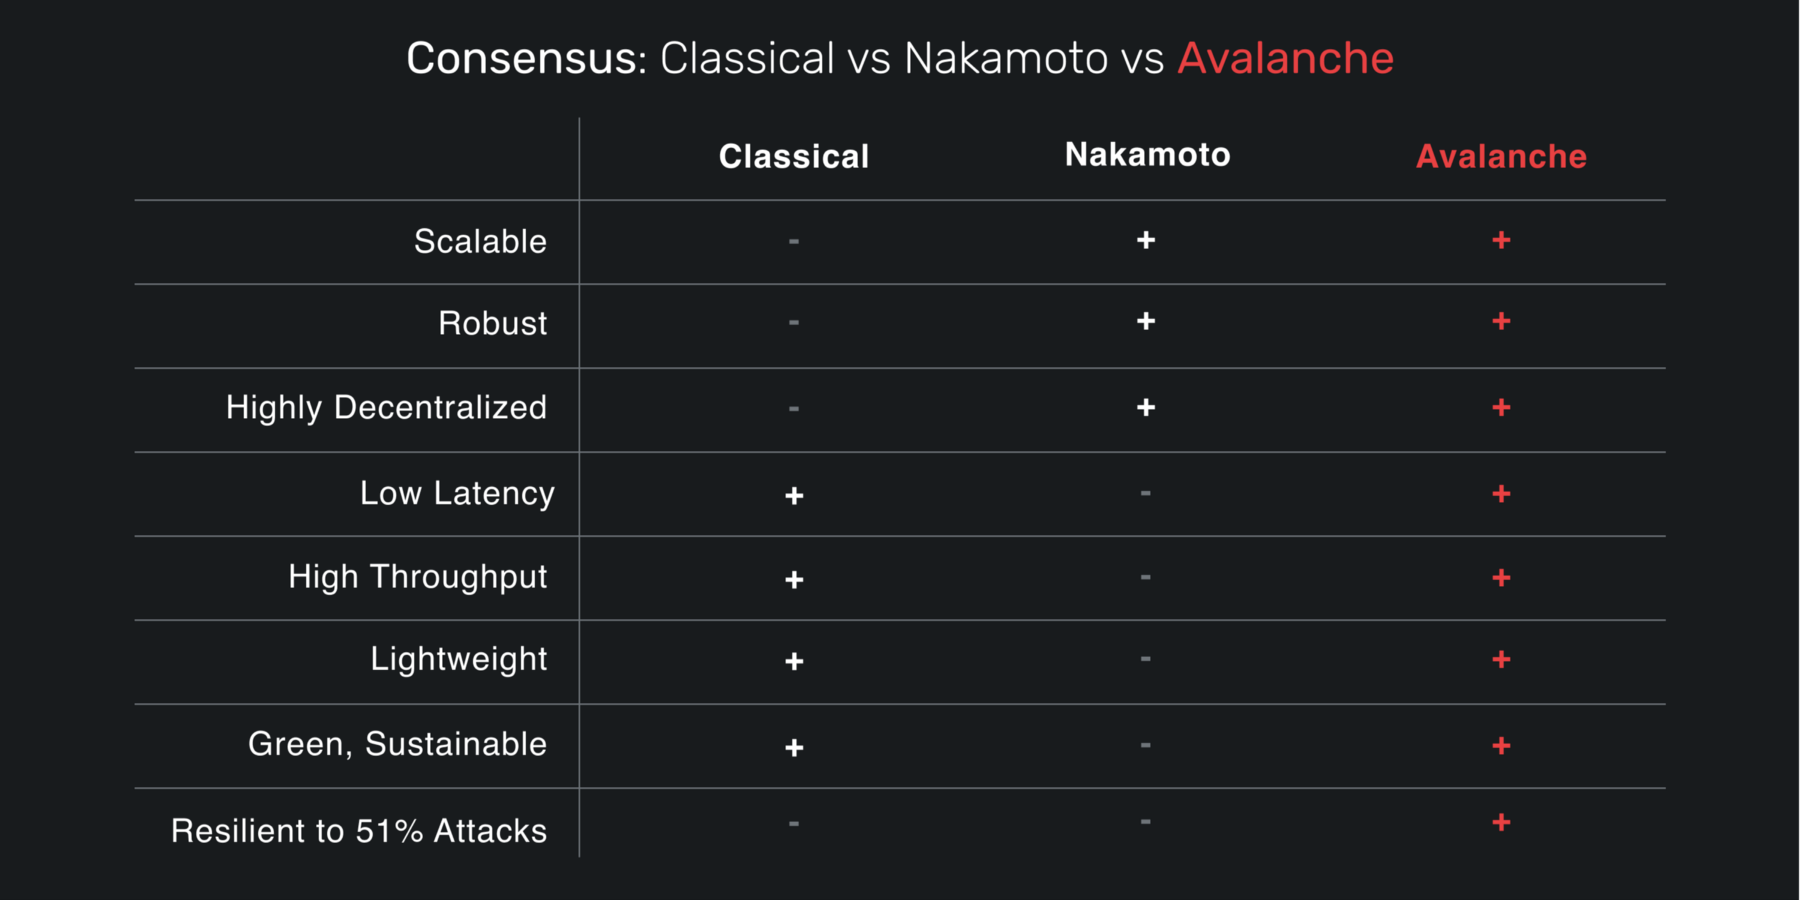 Consensus comparison table btw Nakamoto, Classical & Avalanche consensus for dApps on Avalanche.